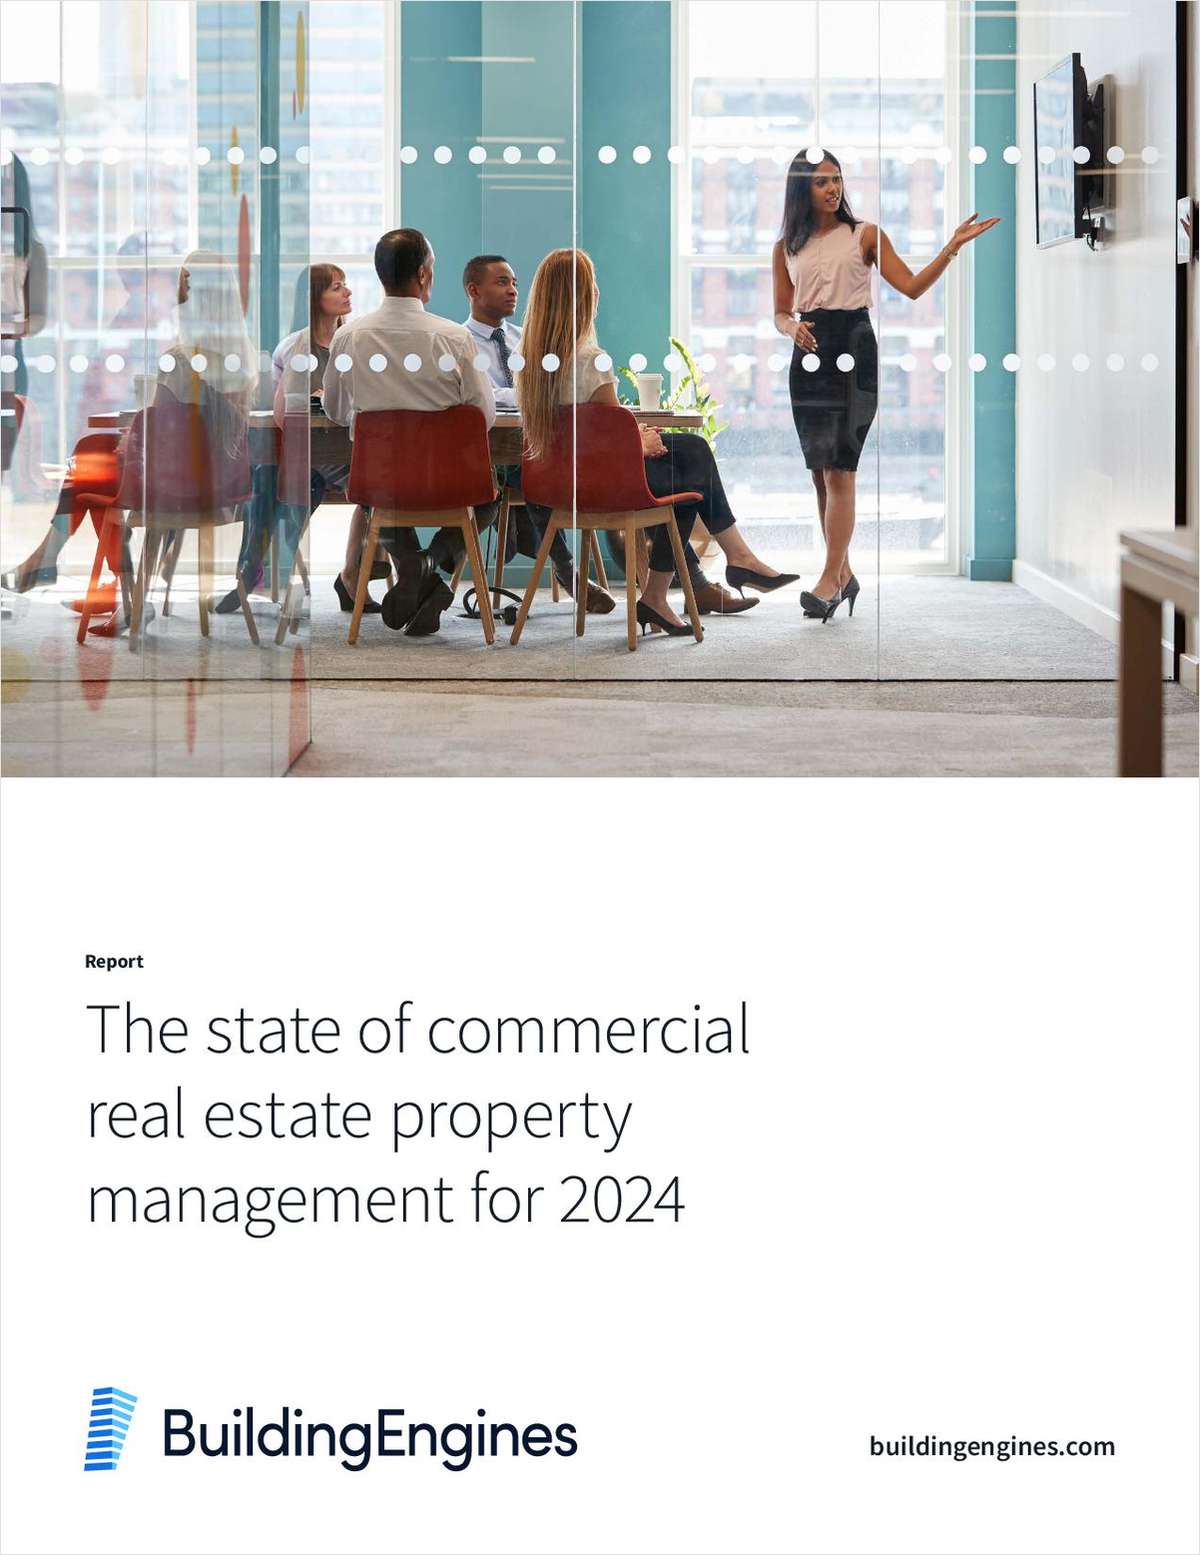 The State of Commercial Real Estate Property Management for 2024 link